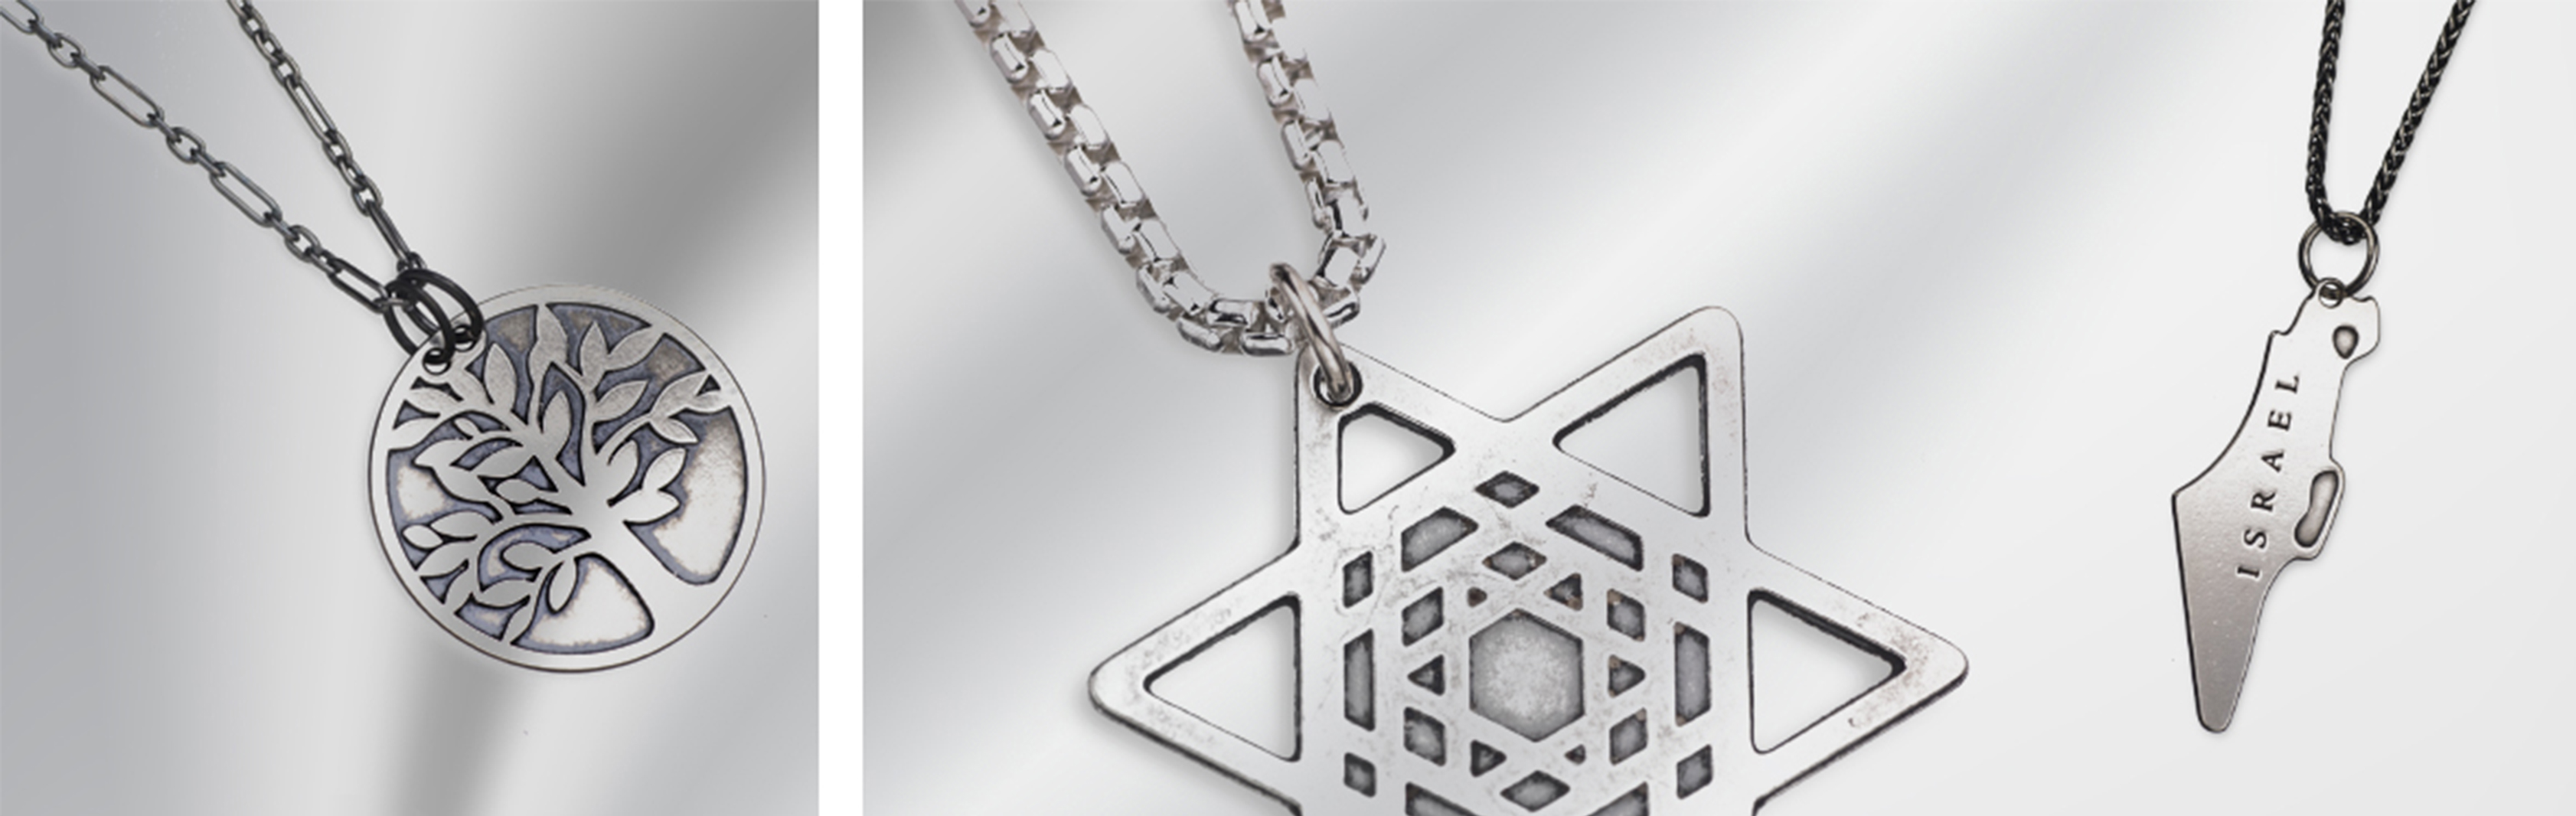 The Evil Eye Necklace, The Evil Eye, Star of David Necklace, Star of David, Men Necklace, Eretz Israel Necklace, Map of Eretz Israel, Hamsa Necklace, Hamsa, Hamsa Pendant, Star of David Pendant, Map of Israel Pendant, State of Israel Necklace, Israeli Jew